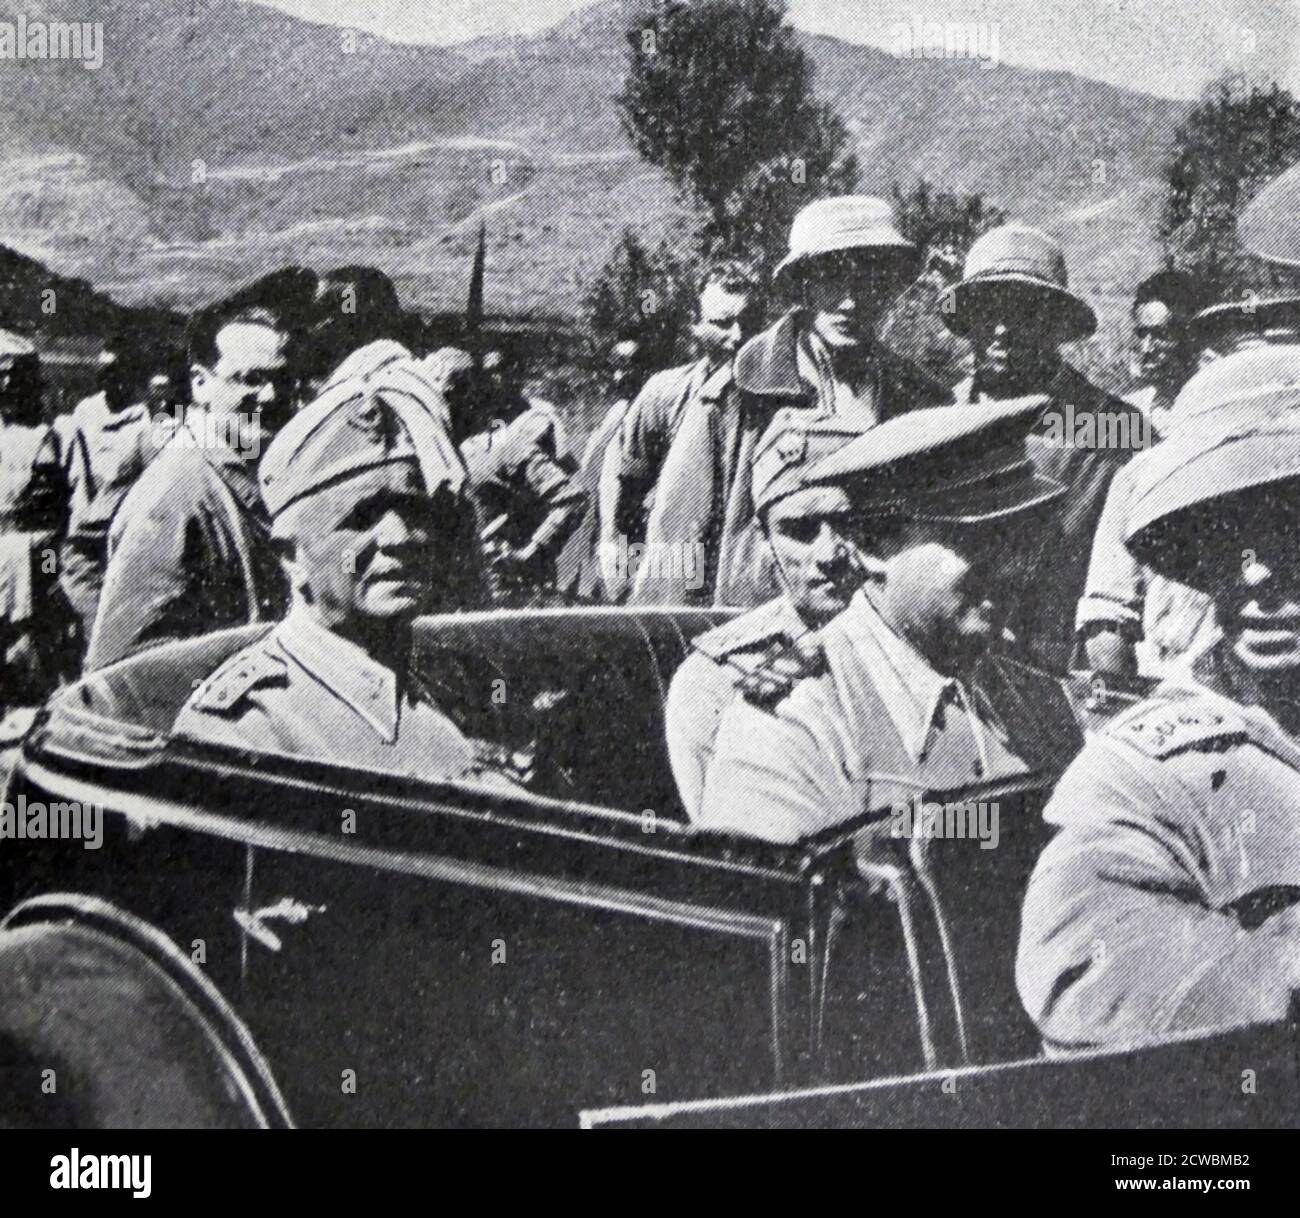 Black and white photo of the War in Ethiopia after the Italian invasion of 1935; Marshal Pietro Badoglio (1871-1956), First Duke of Addis Adiba, and victor of the Ethiopian Campaign. Stock Photo